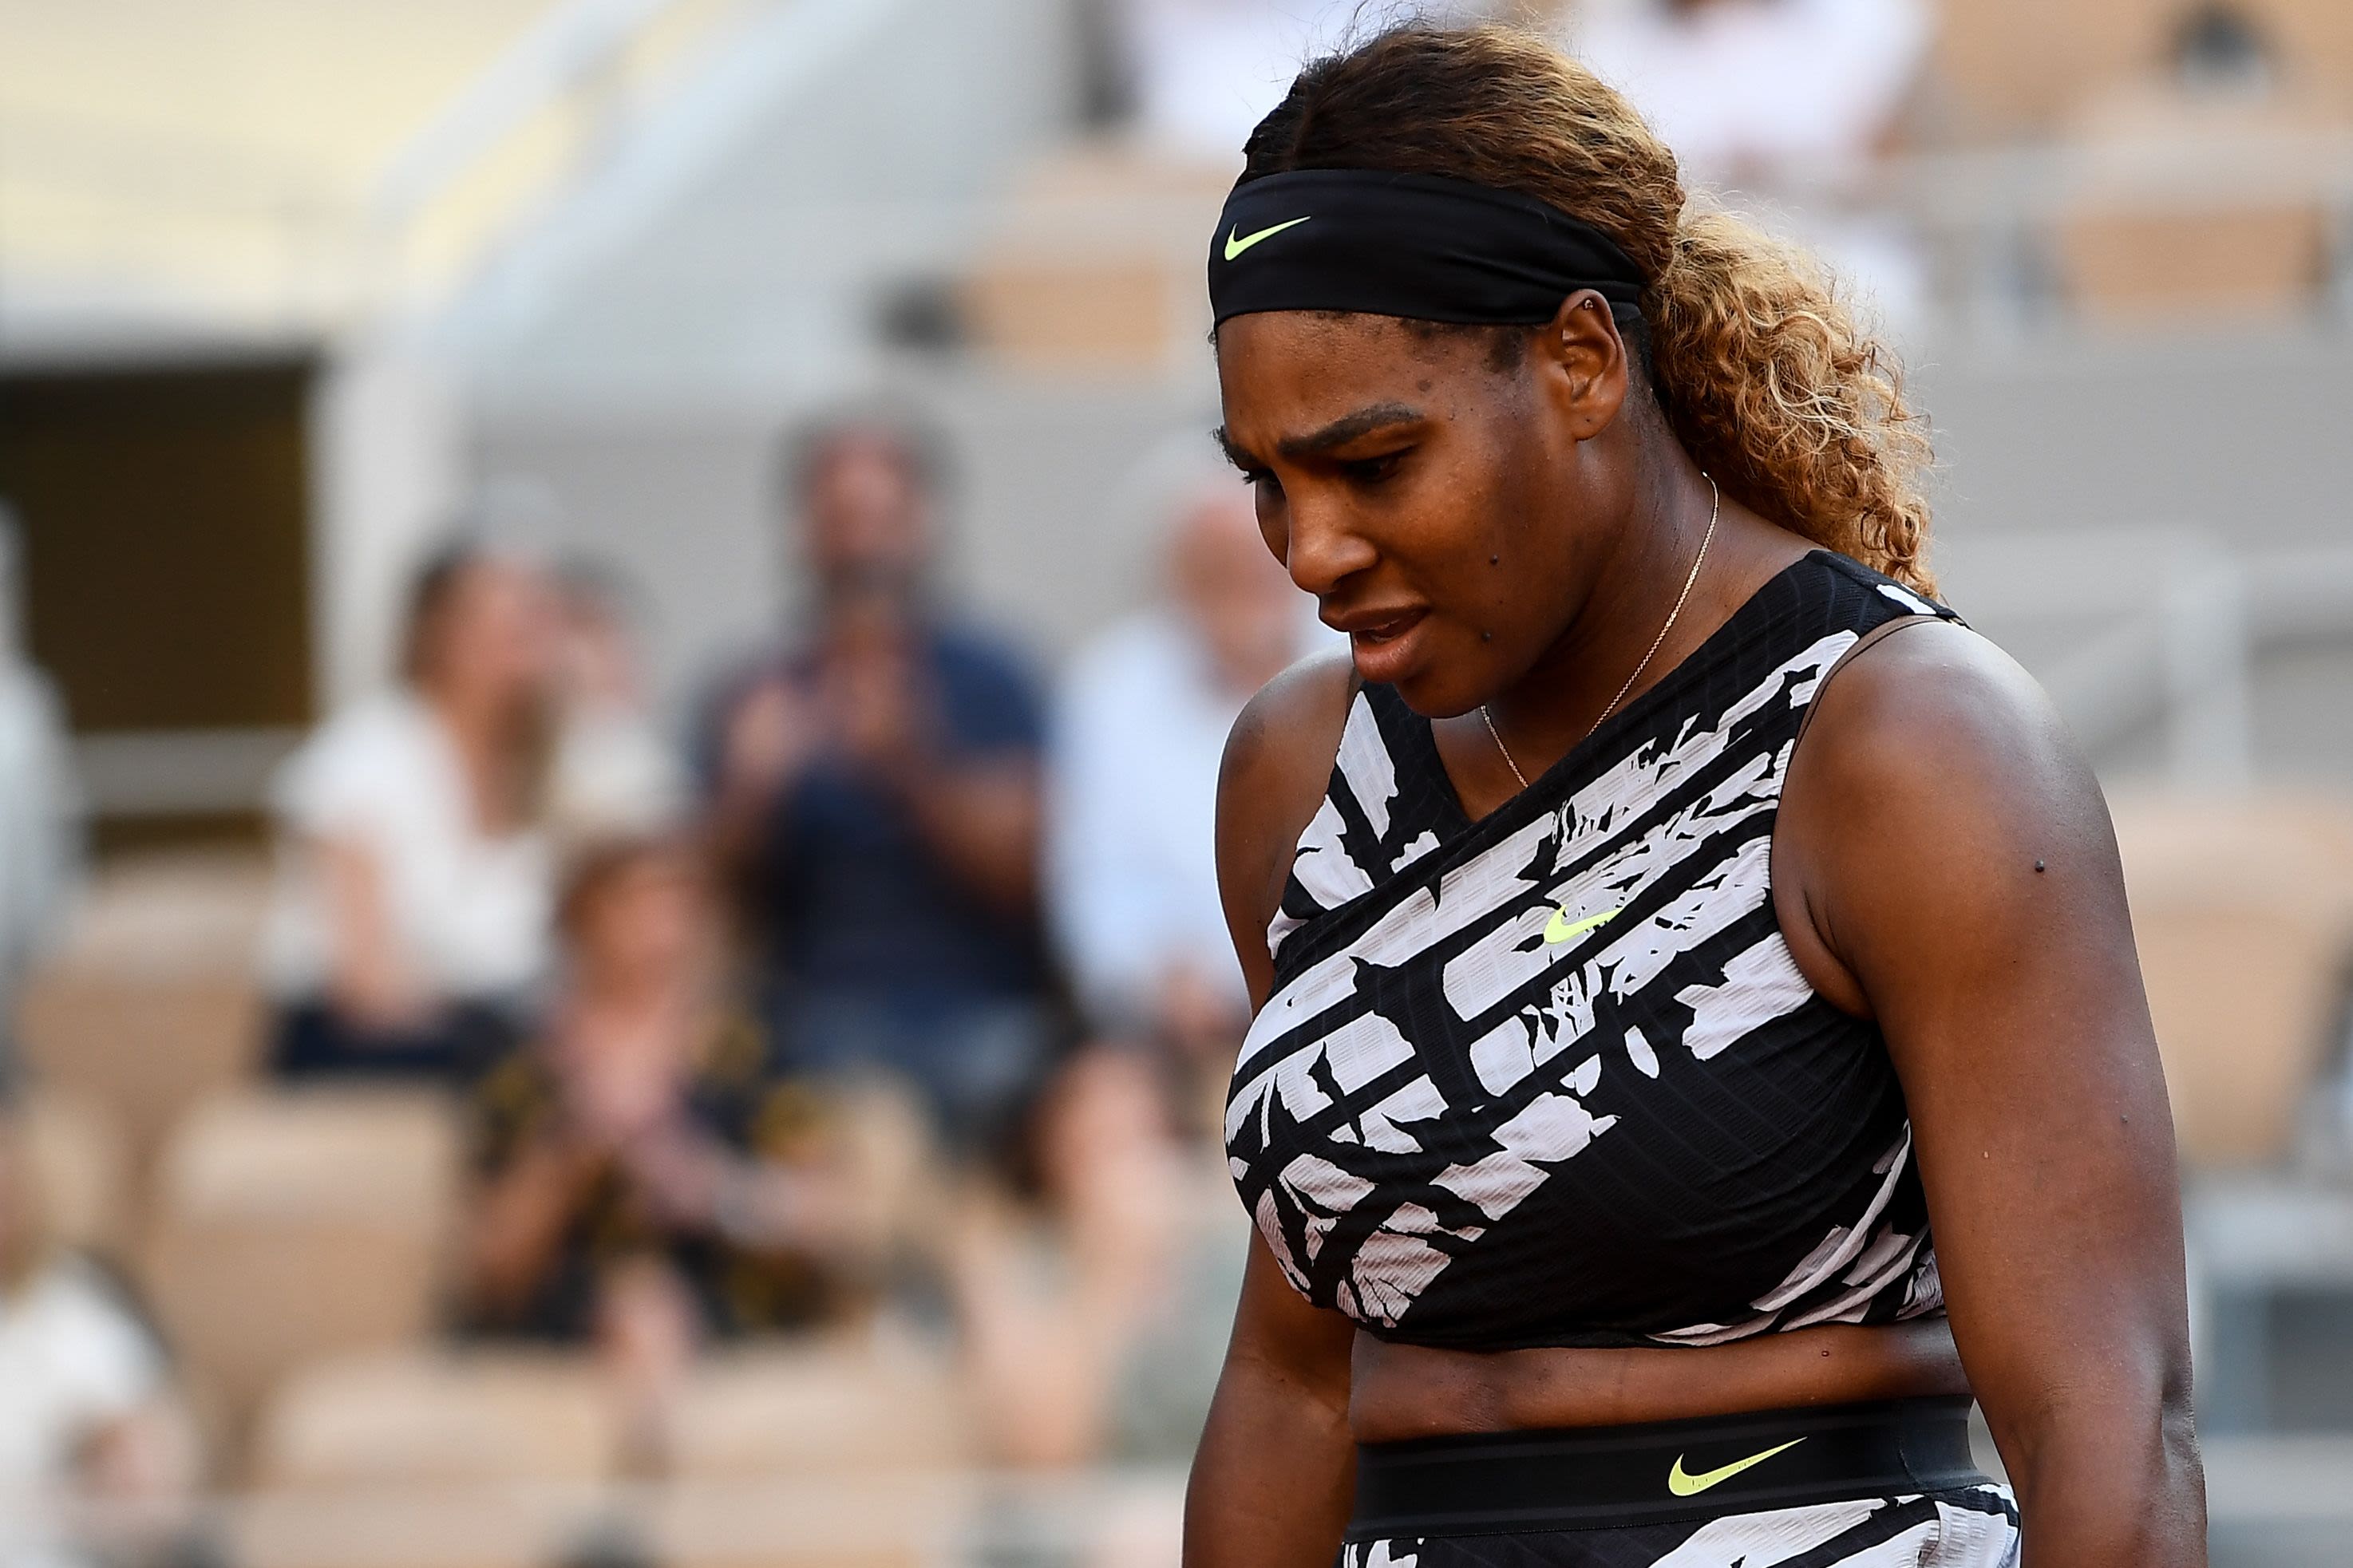 Serena Williams eliminated from French Open, loses quest for 24th Grand Slam title